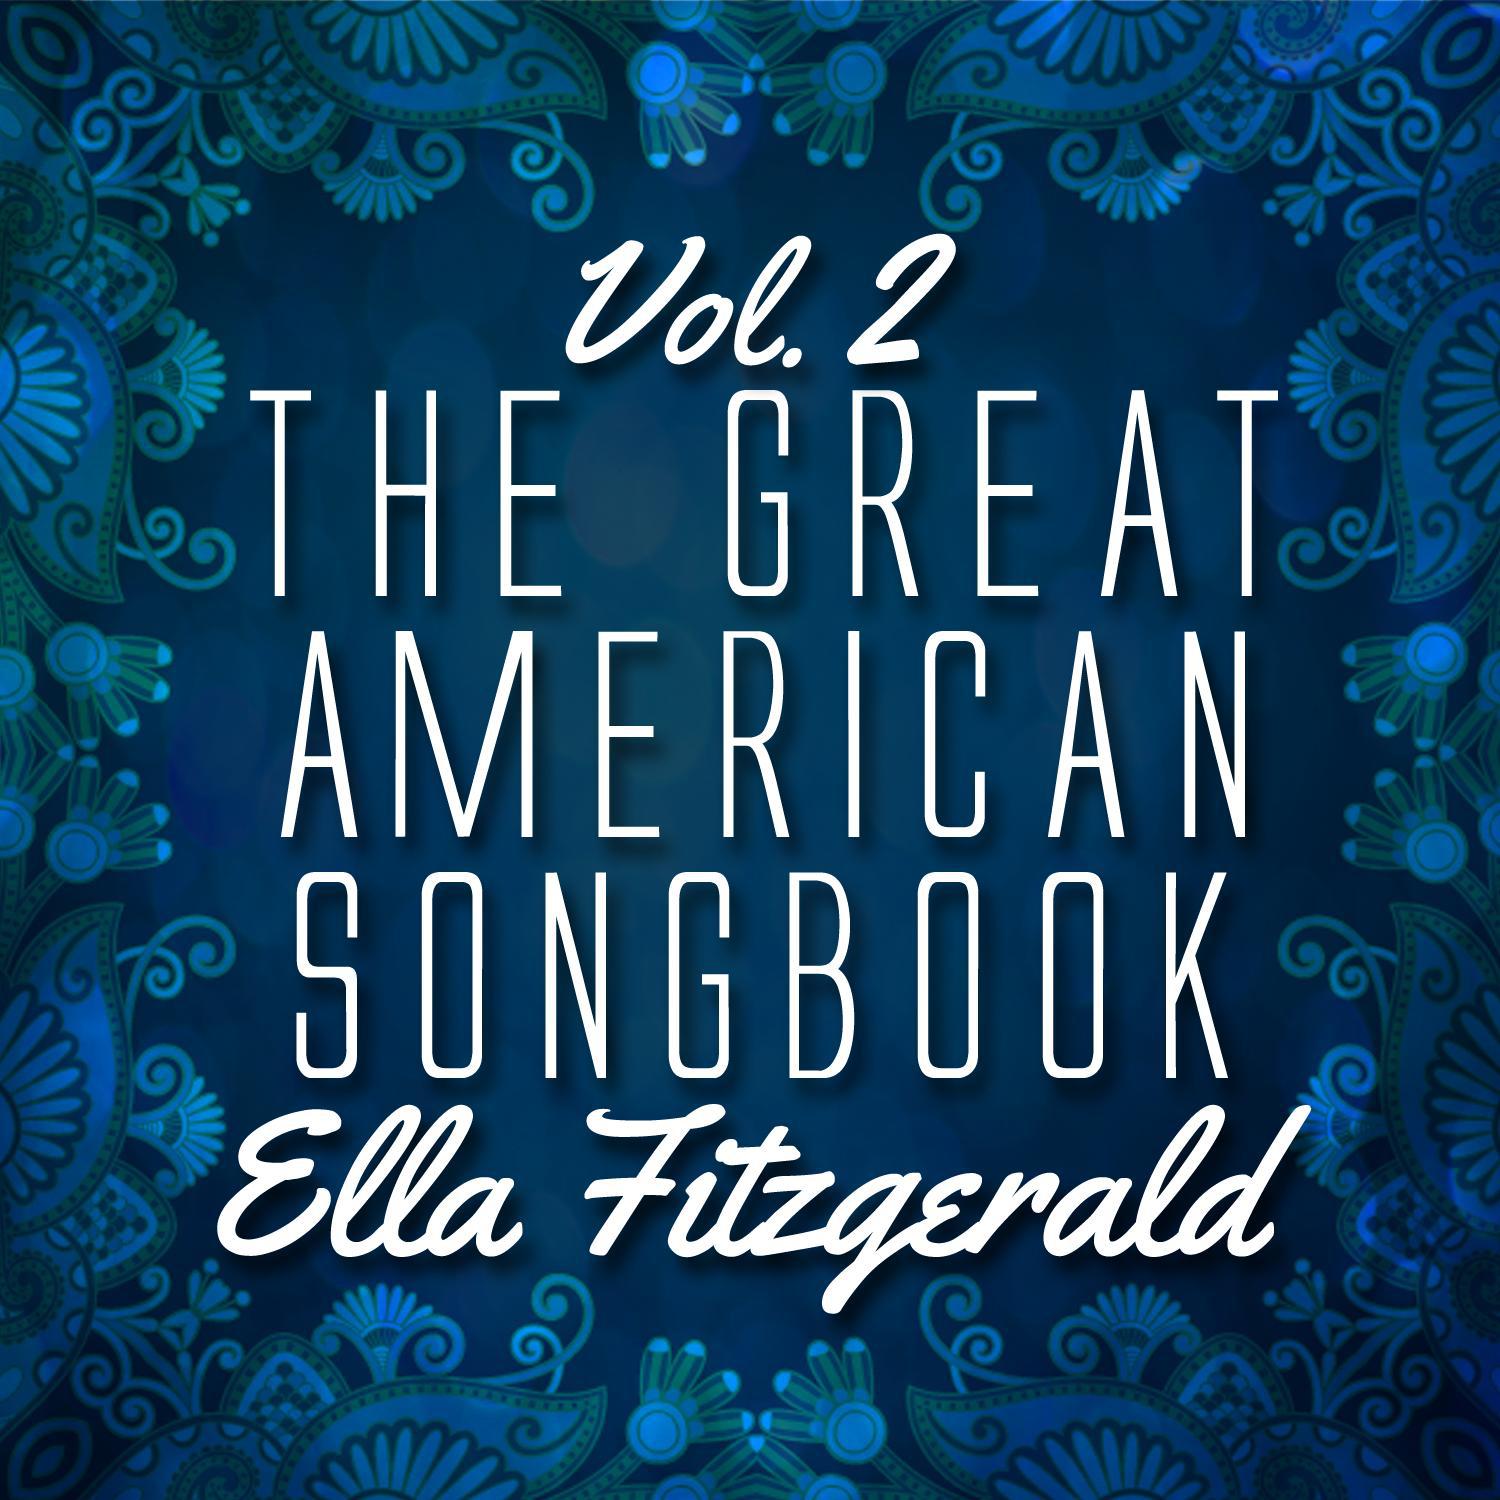 The Great American Songbook Vol. 2